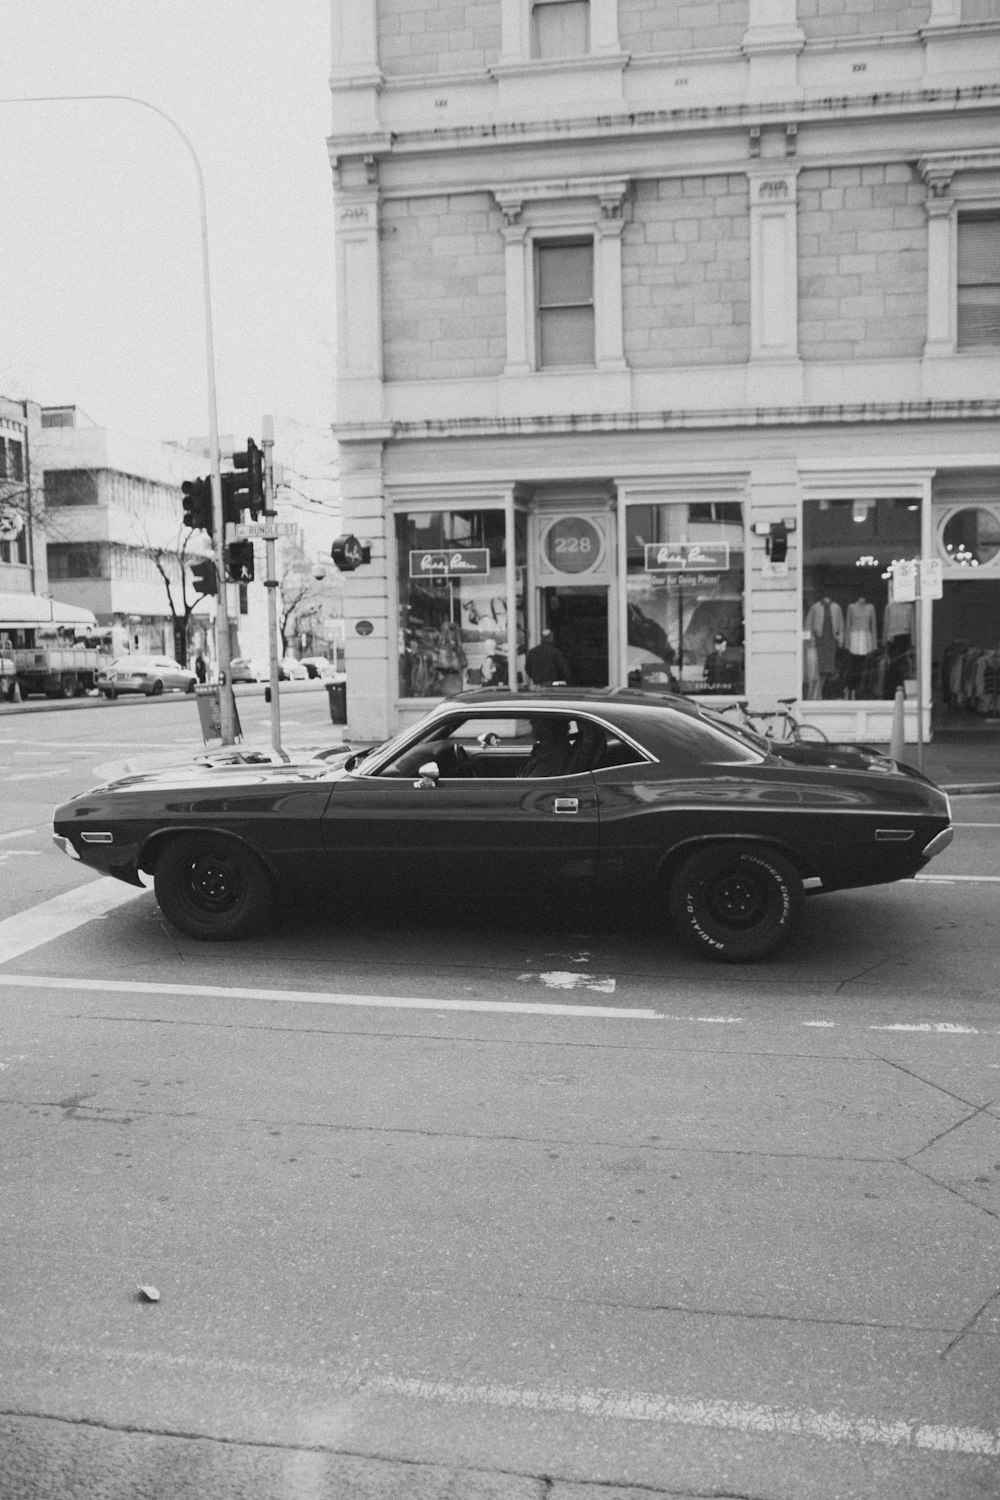 a black and white photo of a car on a street